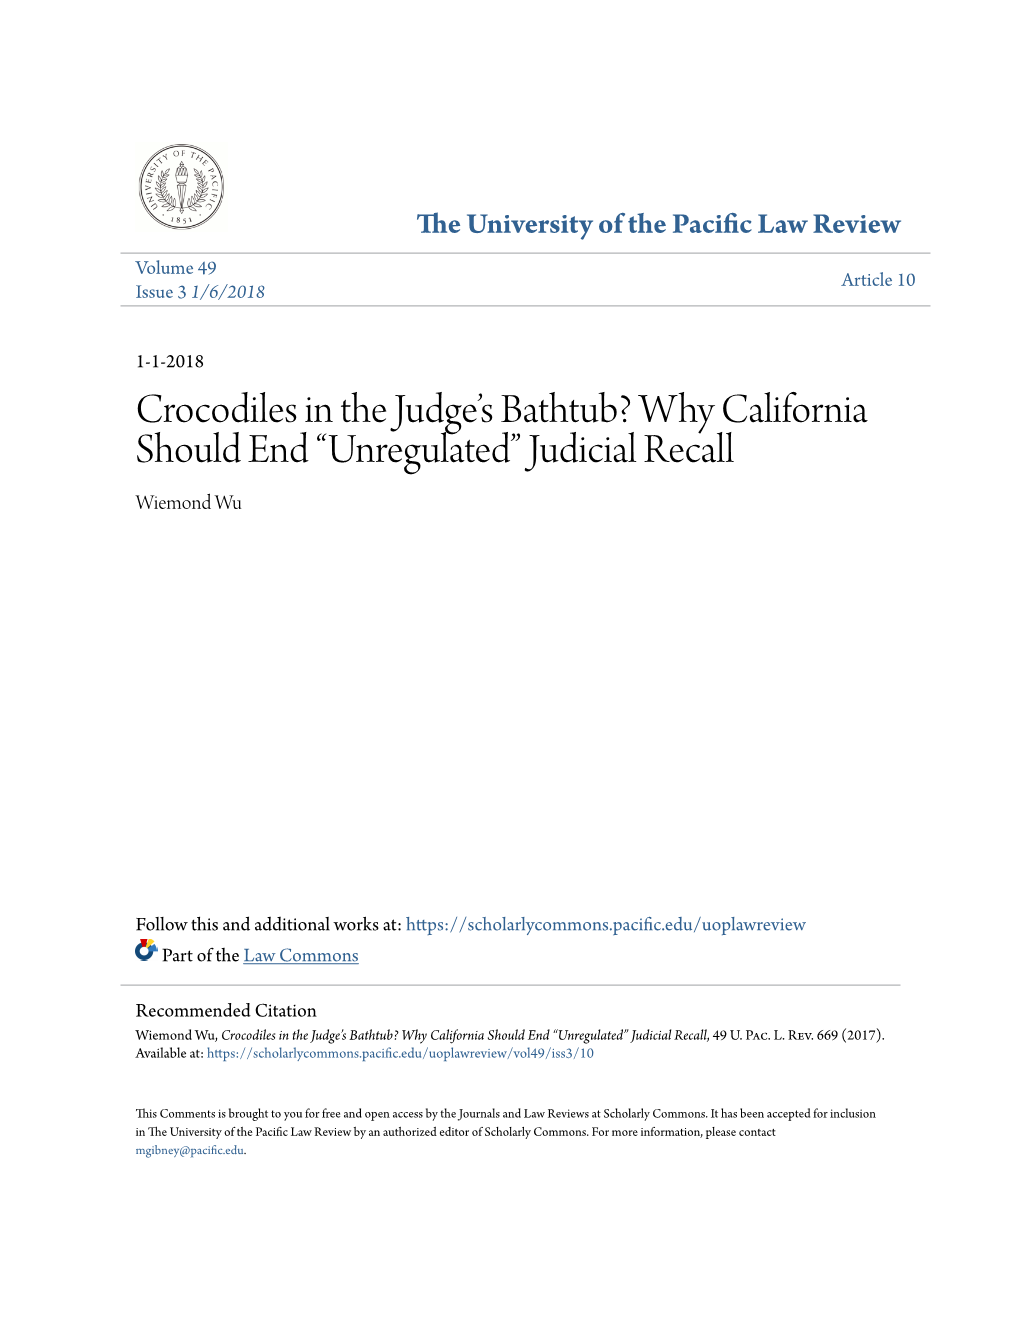 Why California Should End “Unregulated” Judicial Recall Wiemond Wu